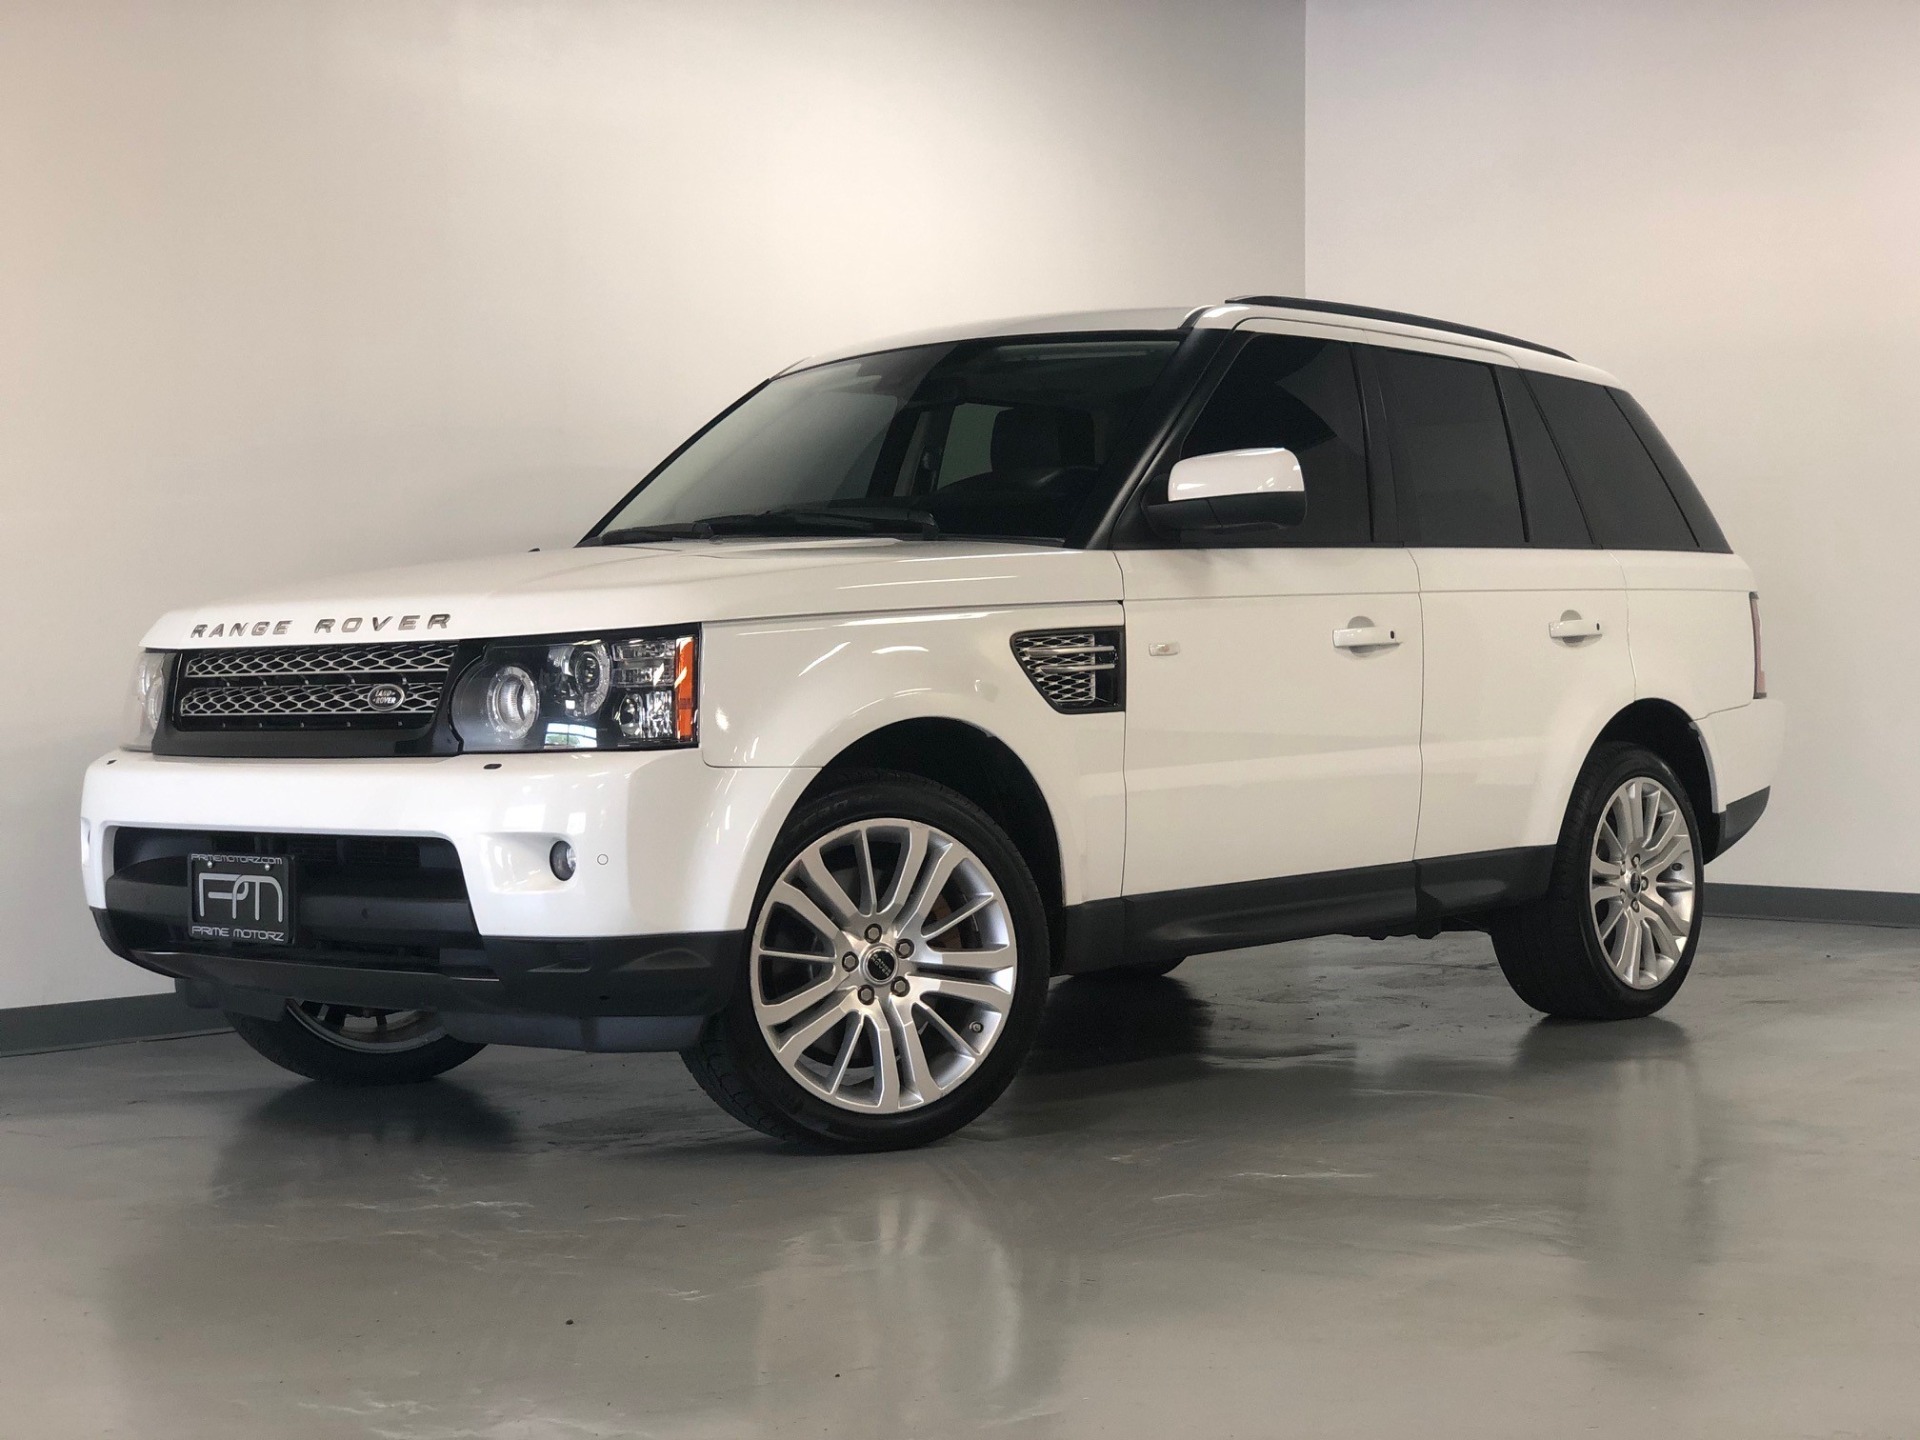 dinosaurus terugbetaling Stiptheid Used 2013 Fuji White Land Rover Range Rover Sport HSE LUX AWD HSE LUX For  Sale (Sold) | Prime Motorz Stock #2751